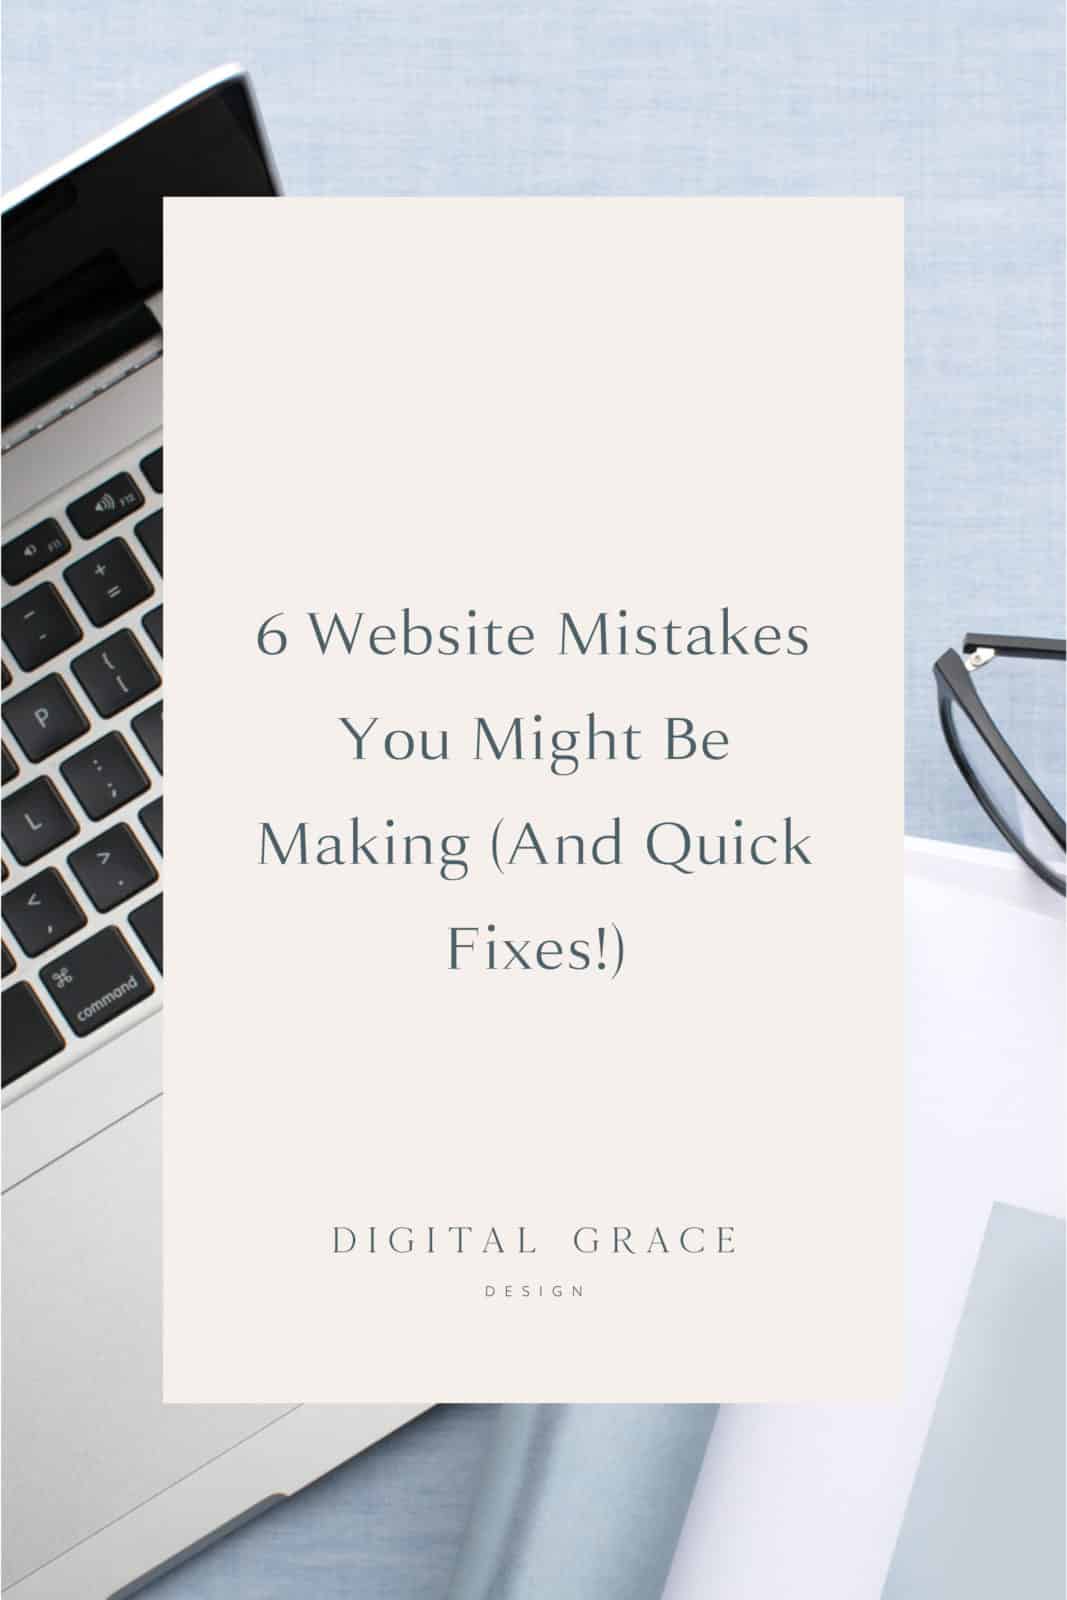 6 Website Mistakes You May Be Making and Quick Fixes